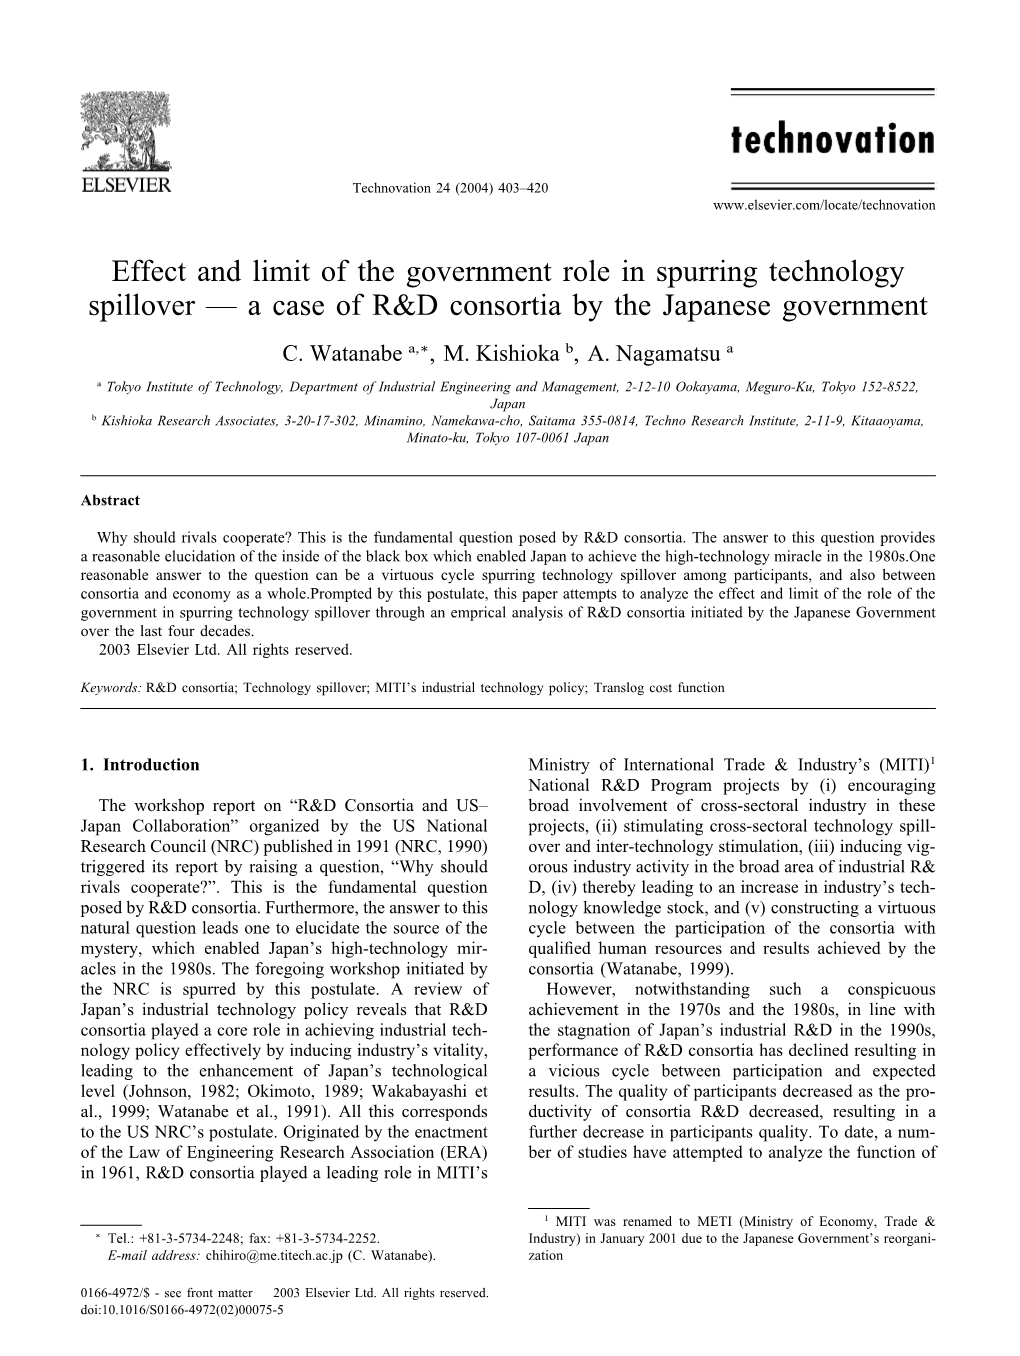 Effect and Limit of the Government Role in Spurring Technology Spillover — a Case of R&D Consortia by the Japanese Governm